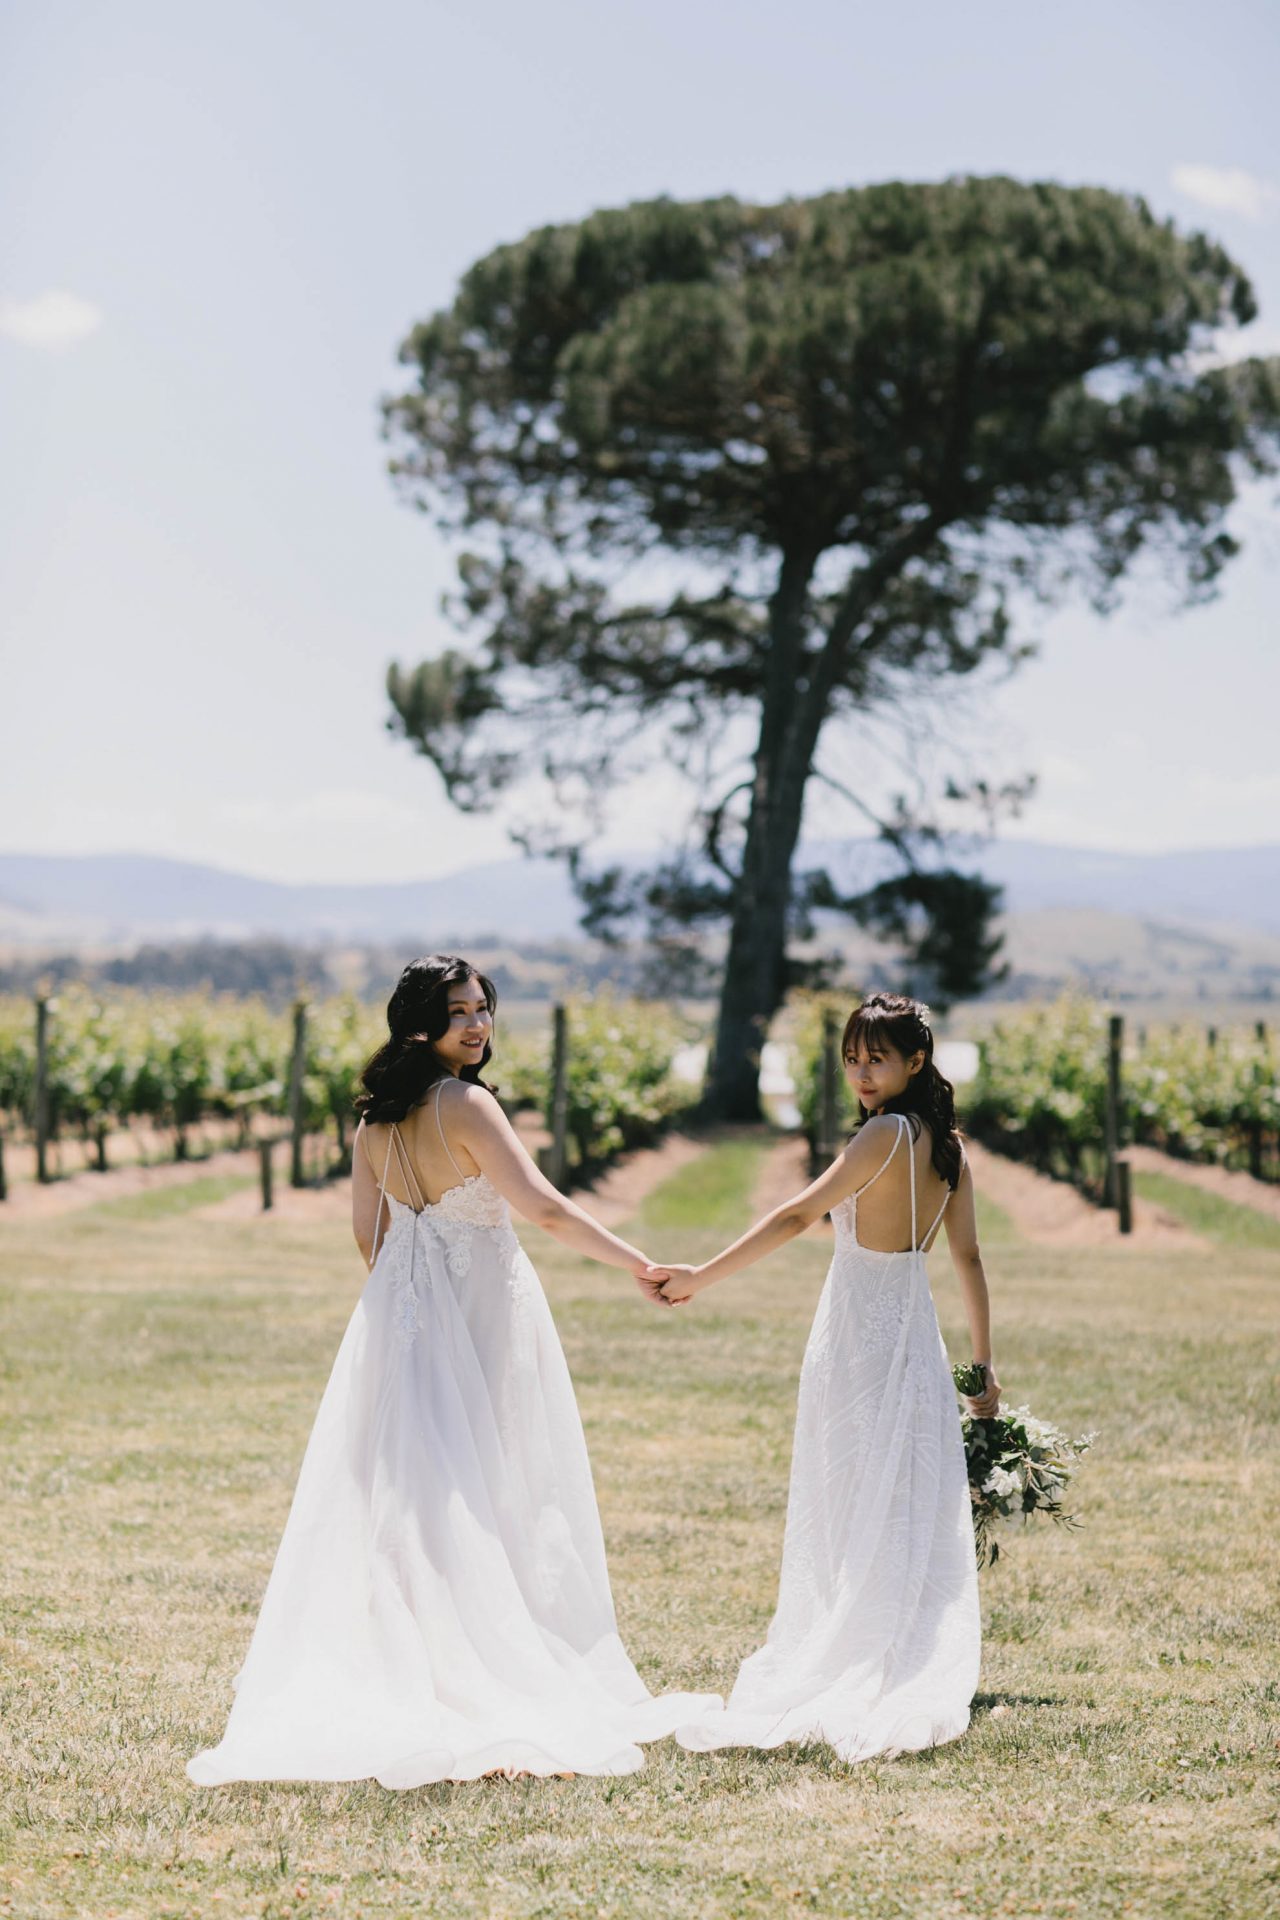 Cindy + Melissa // Stones of the Yarra Valley